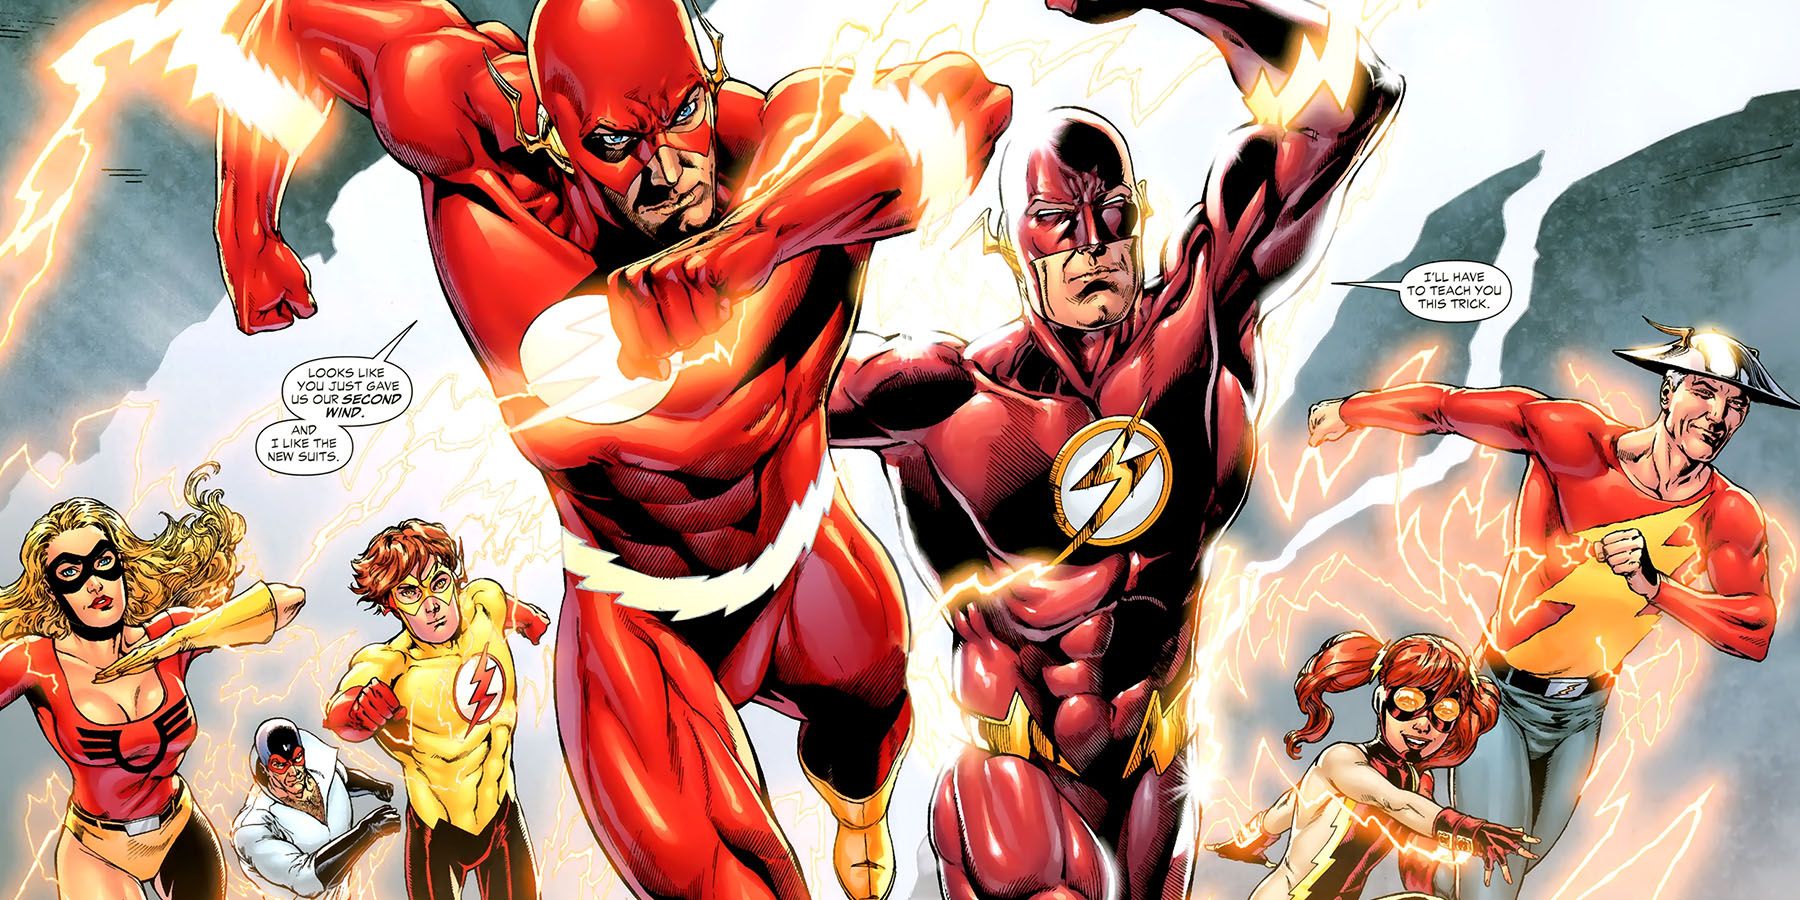 The Flash Family debuting new costumes before Flashpoint